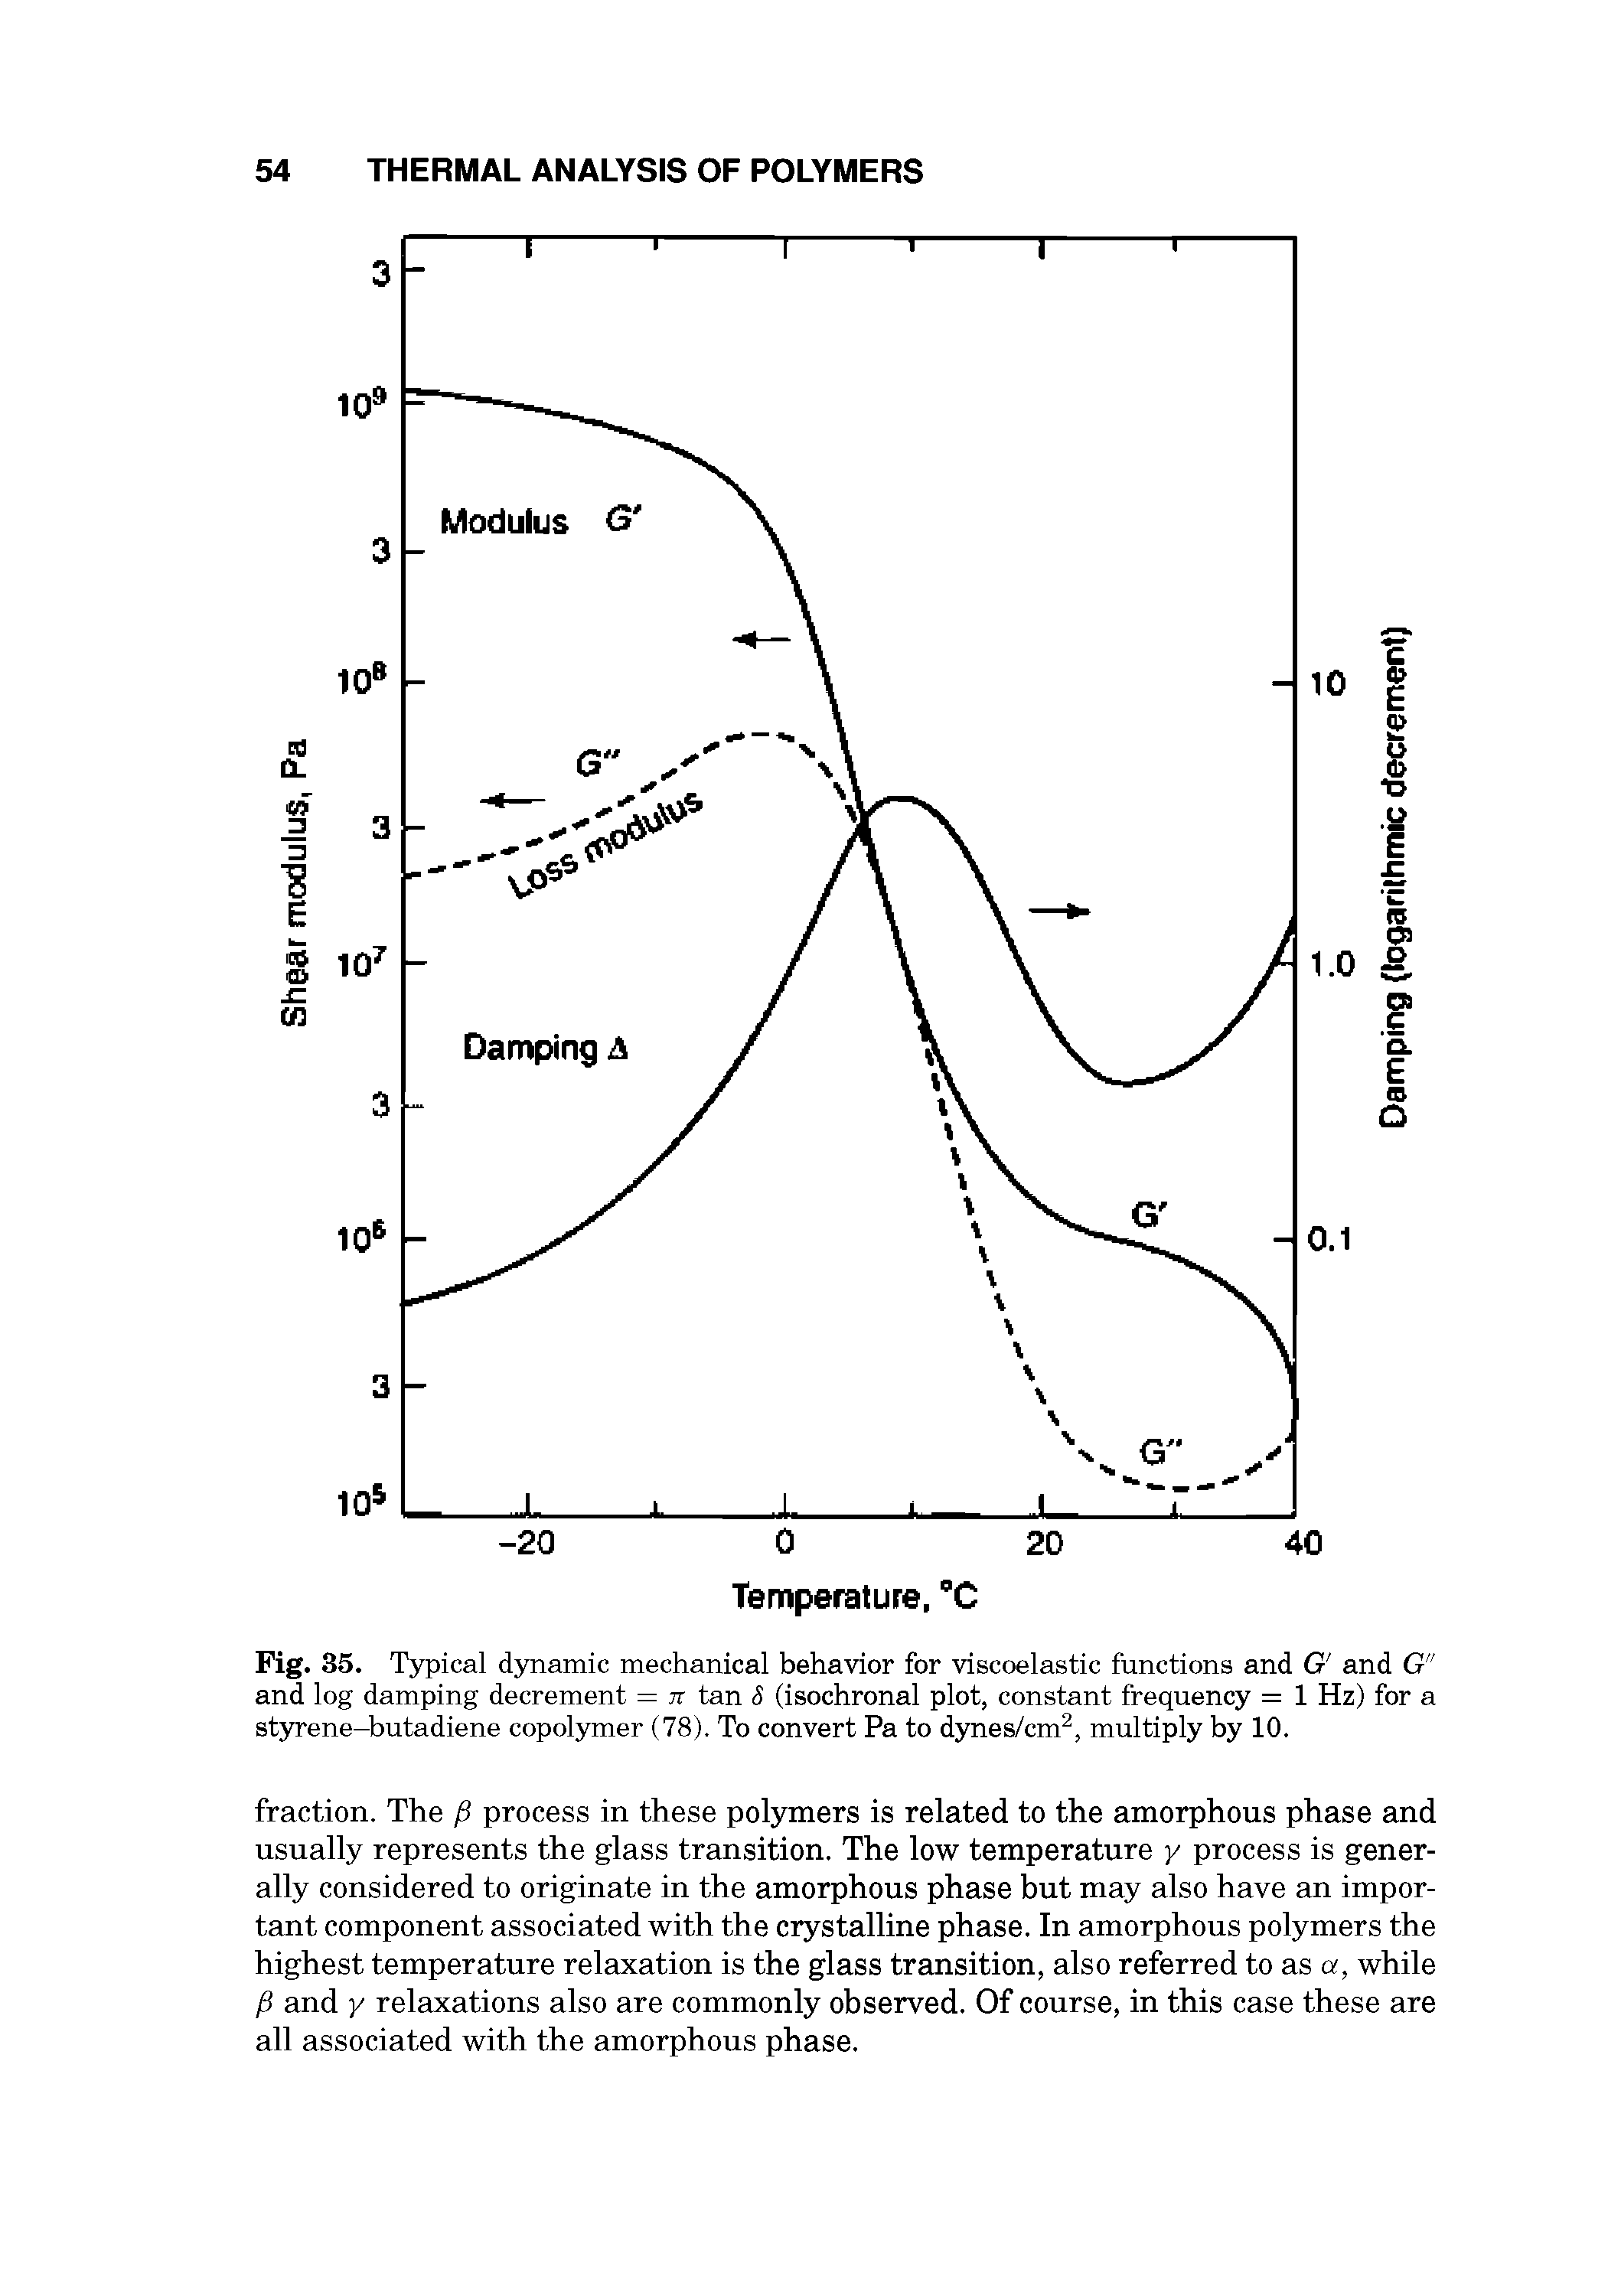 Fig. 35. Typical djaiamic mechanical behavior for viscoelastic functions and G and G" and log damping decrement = tt tan S (isochronal plot, constant frequency = 1 Hz) for a styrene-butadiene copolymer (78). To convert Pa to dynes/cm, multiply by 10.